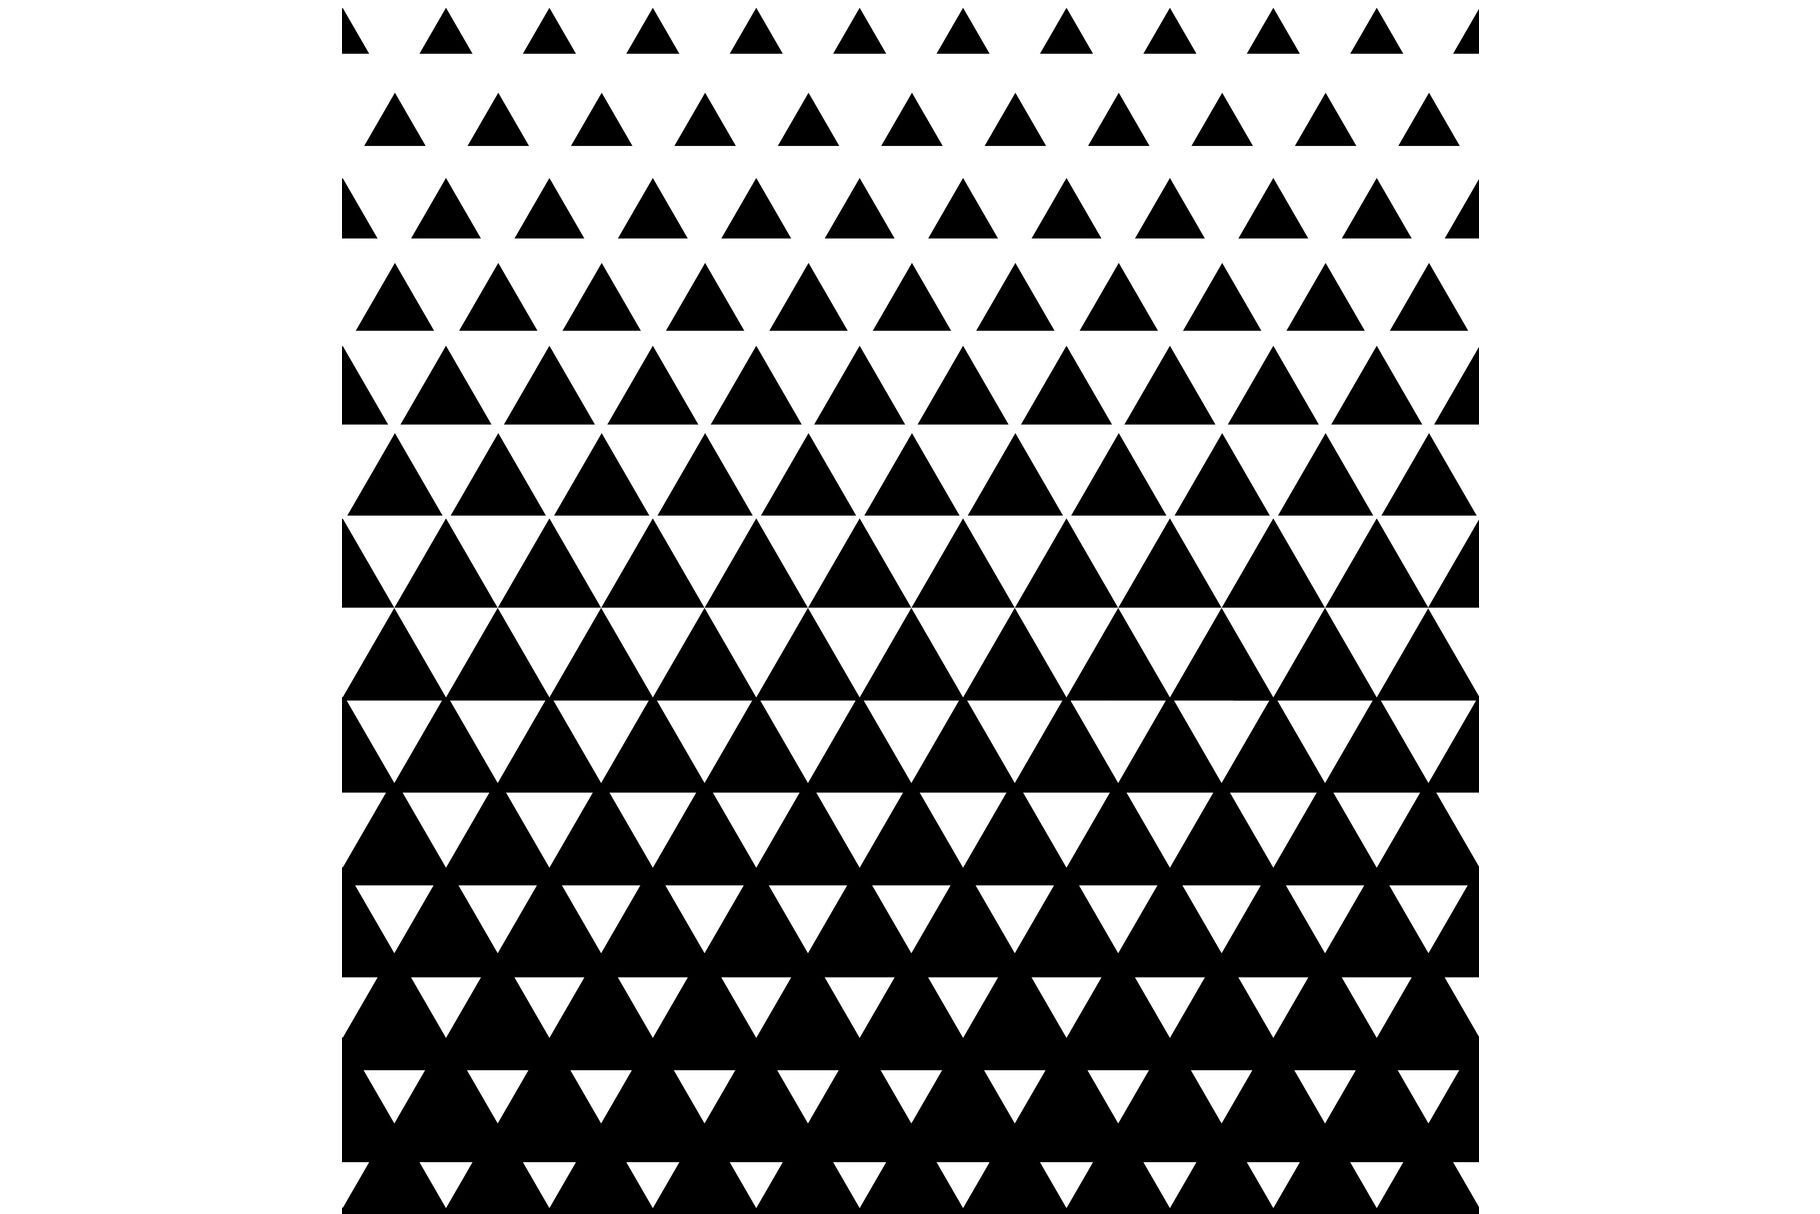 Halftone Triangular Pattern Vector. Abstract Transition Triangular Pattern Wallpaper. Seamless Black And White Triangle Geometric Background. By Pikepicture